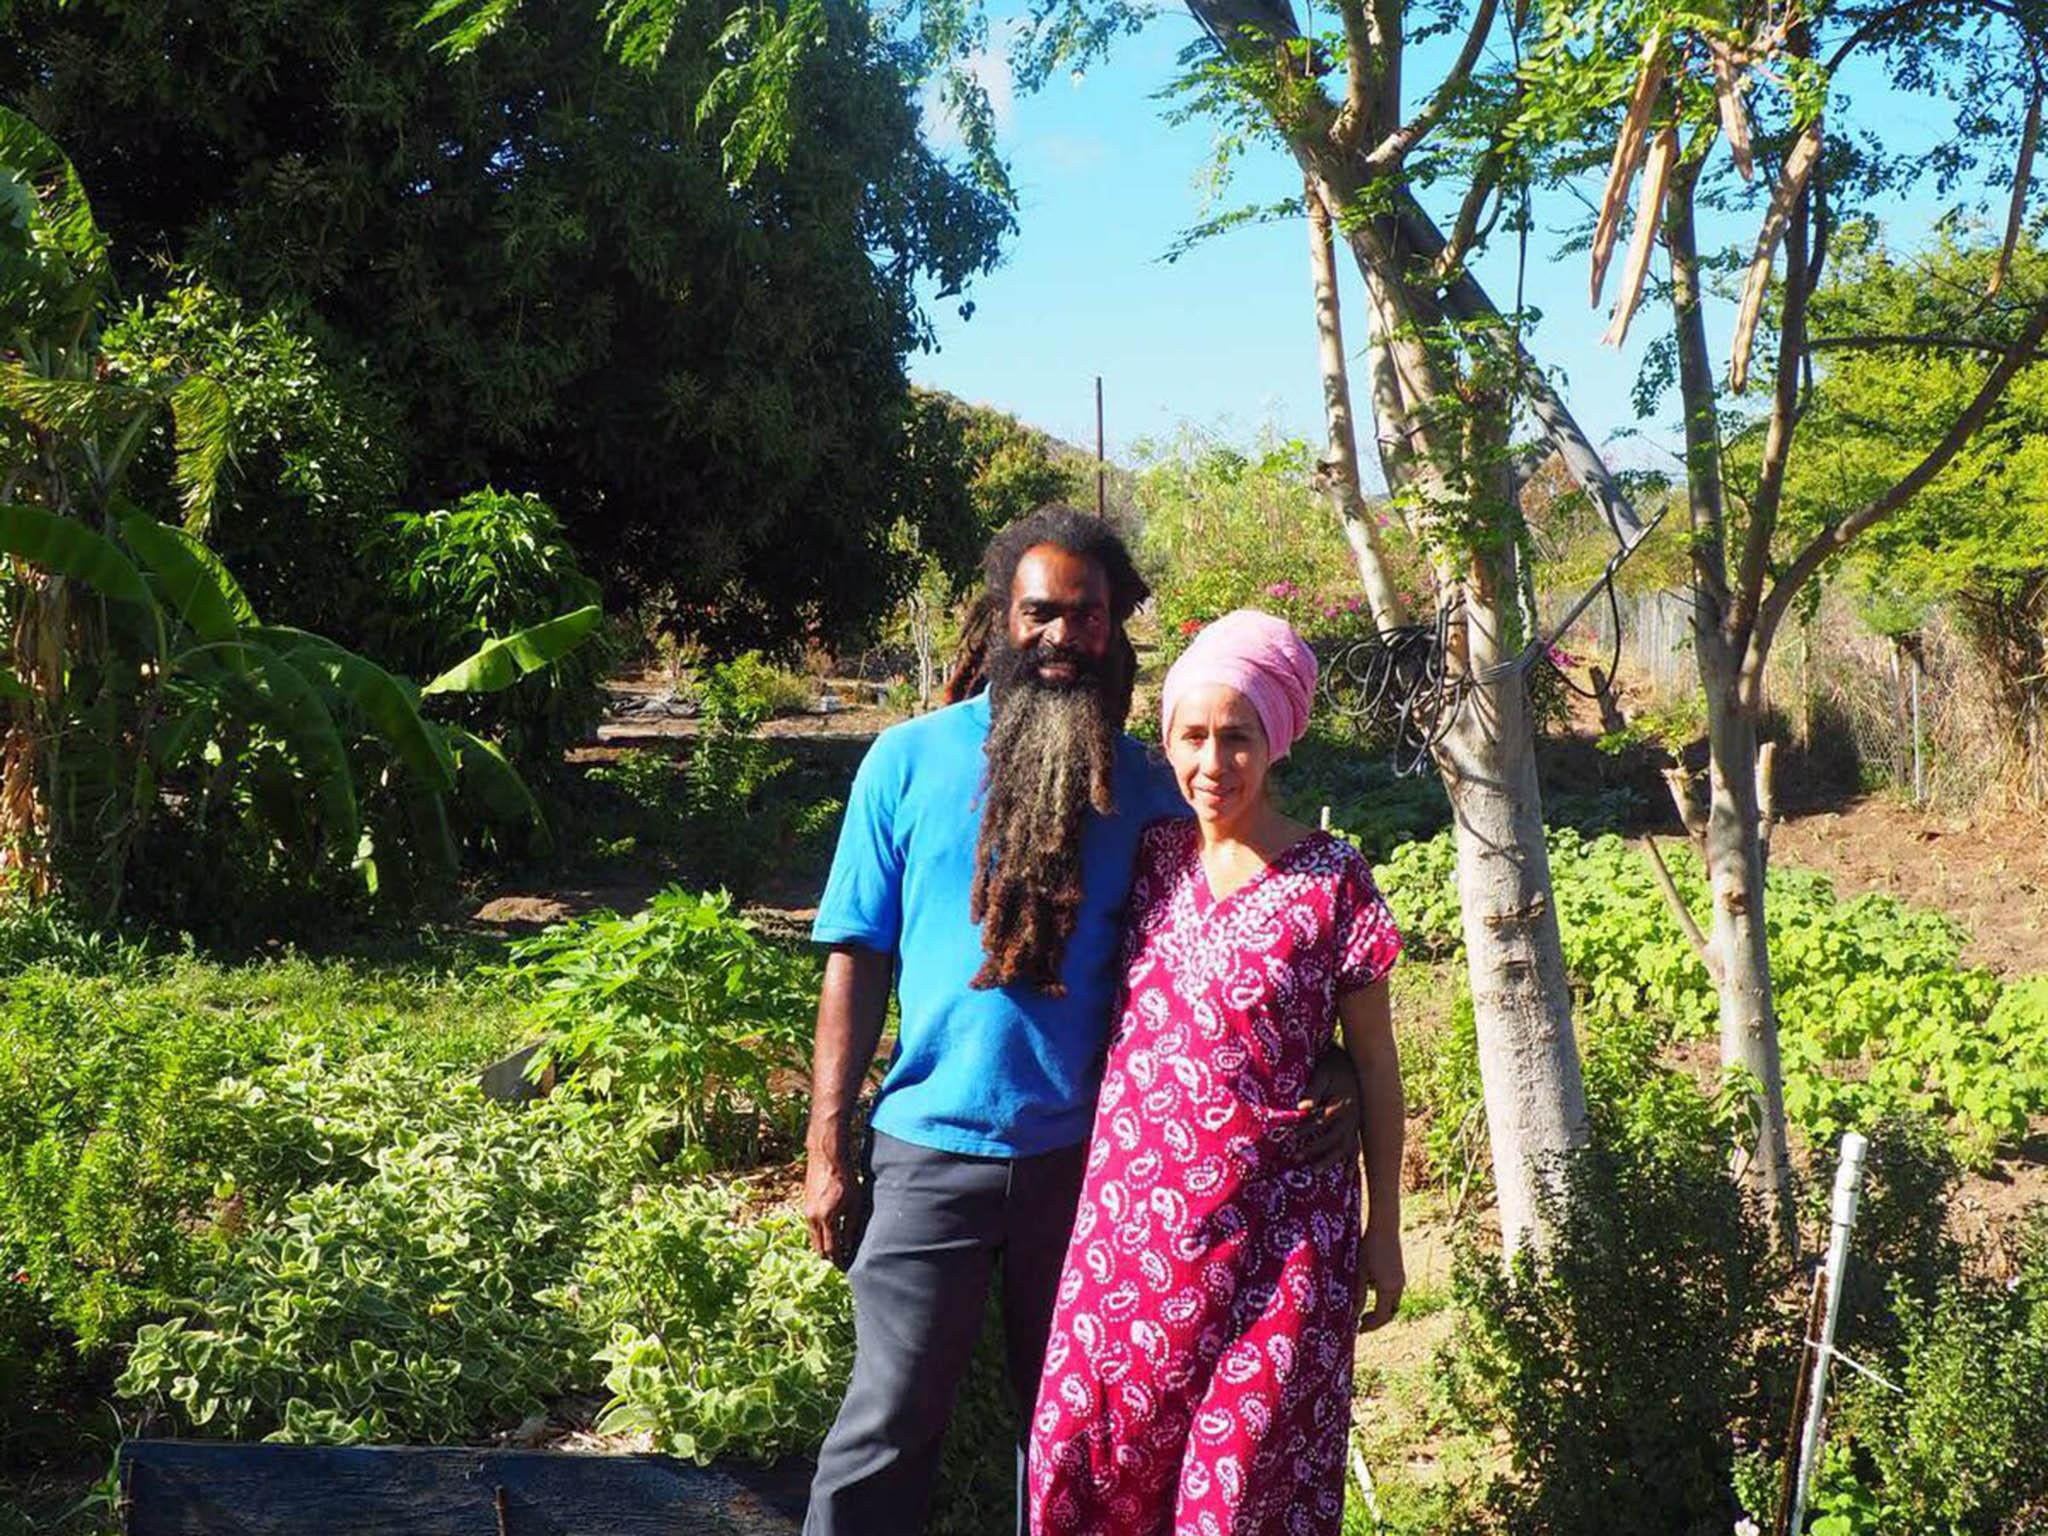 Judah and Yaya run tours of their organic farm to help encourage people to understand the benefits of their produce (All photographs by Hugh Stenhouse)